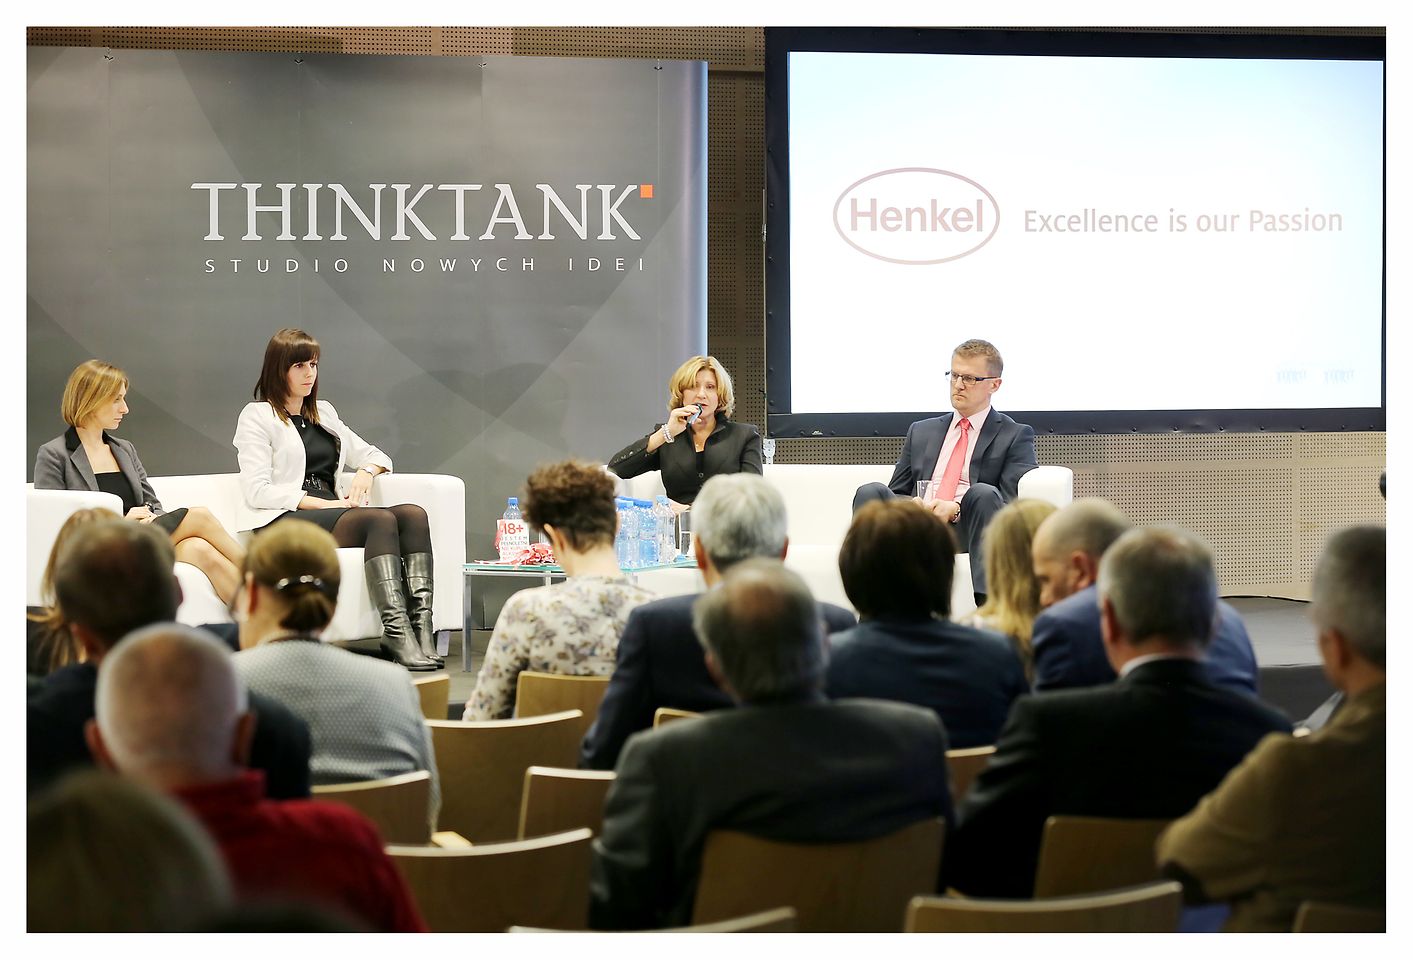 Henkel Poland took part in the conference in Warsaw and presented its policy of diversity.